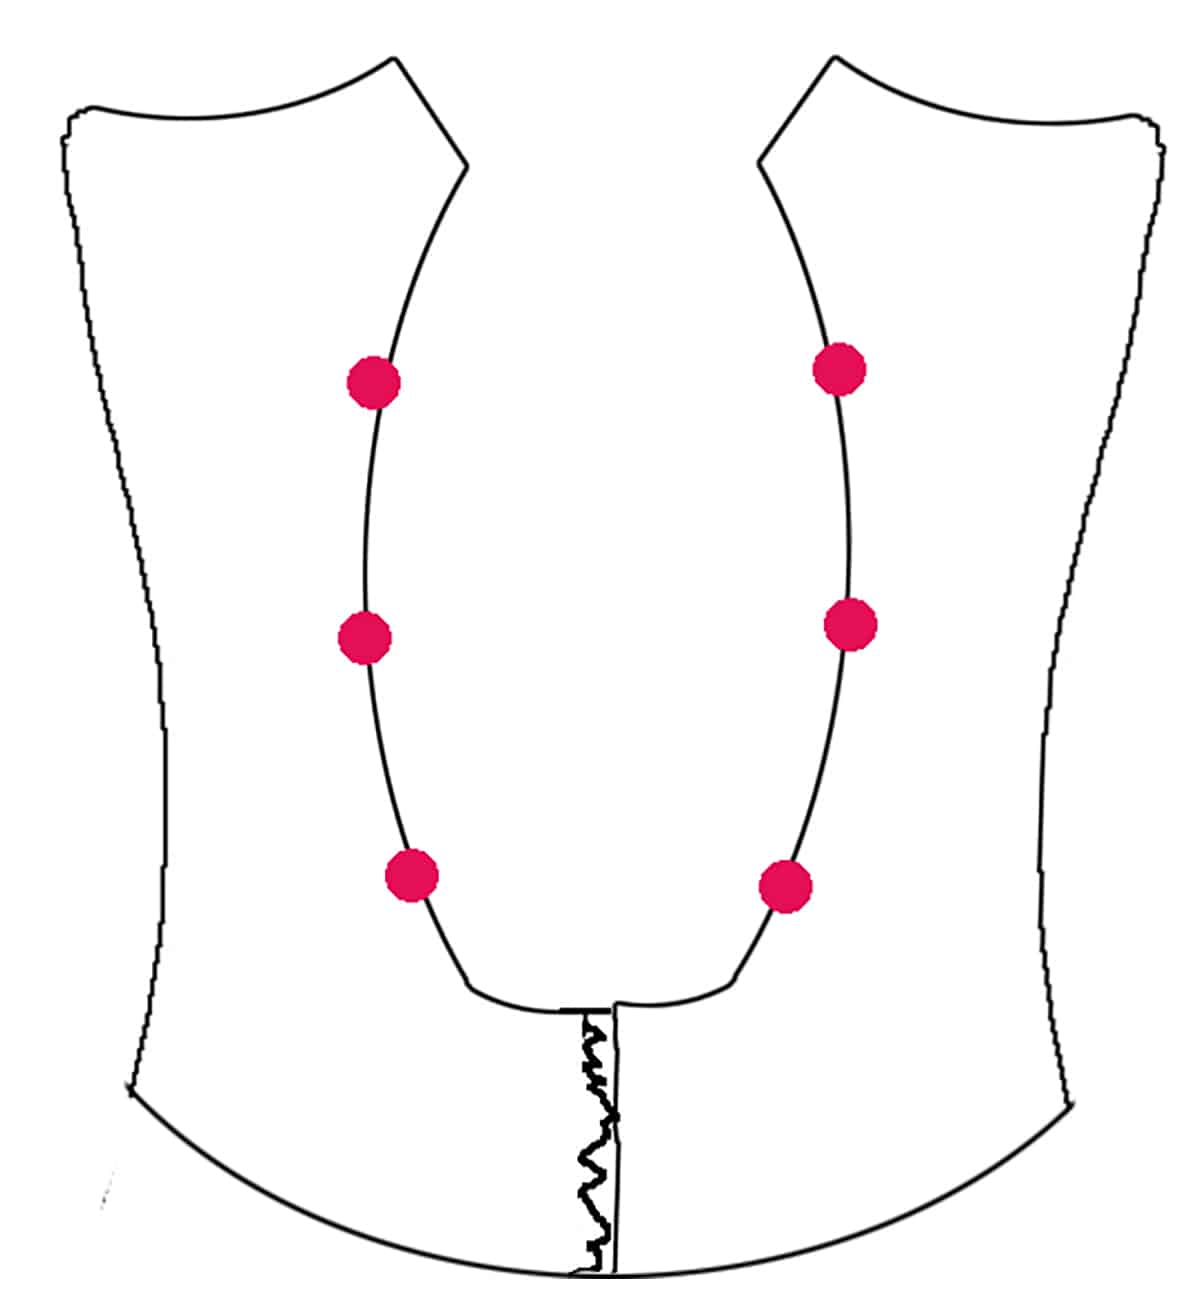 A diagram showing the back of a pattern, with placement of loops marked with red dots.